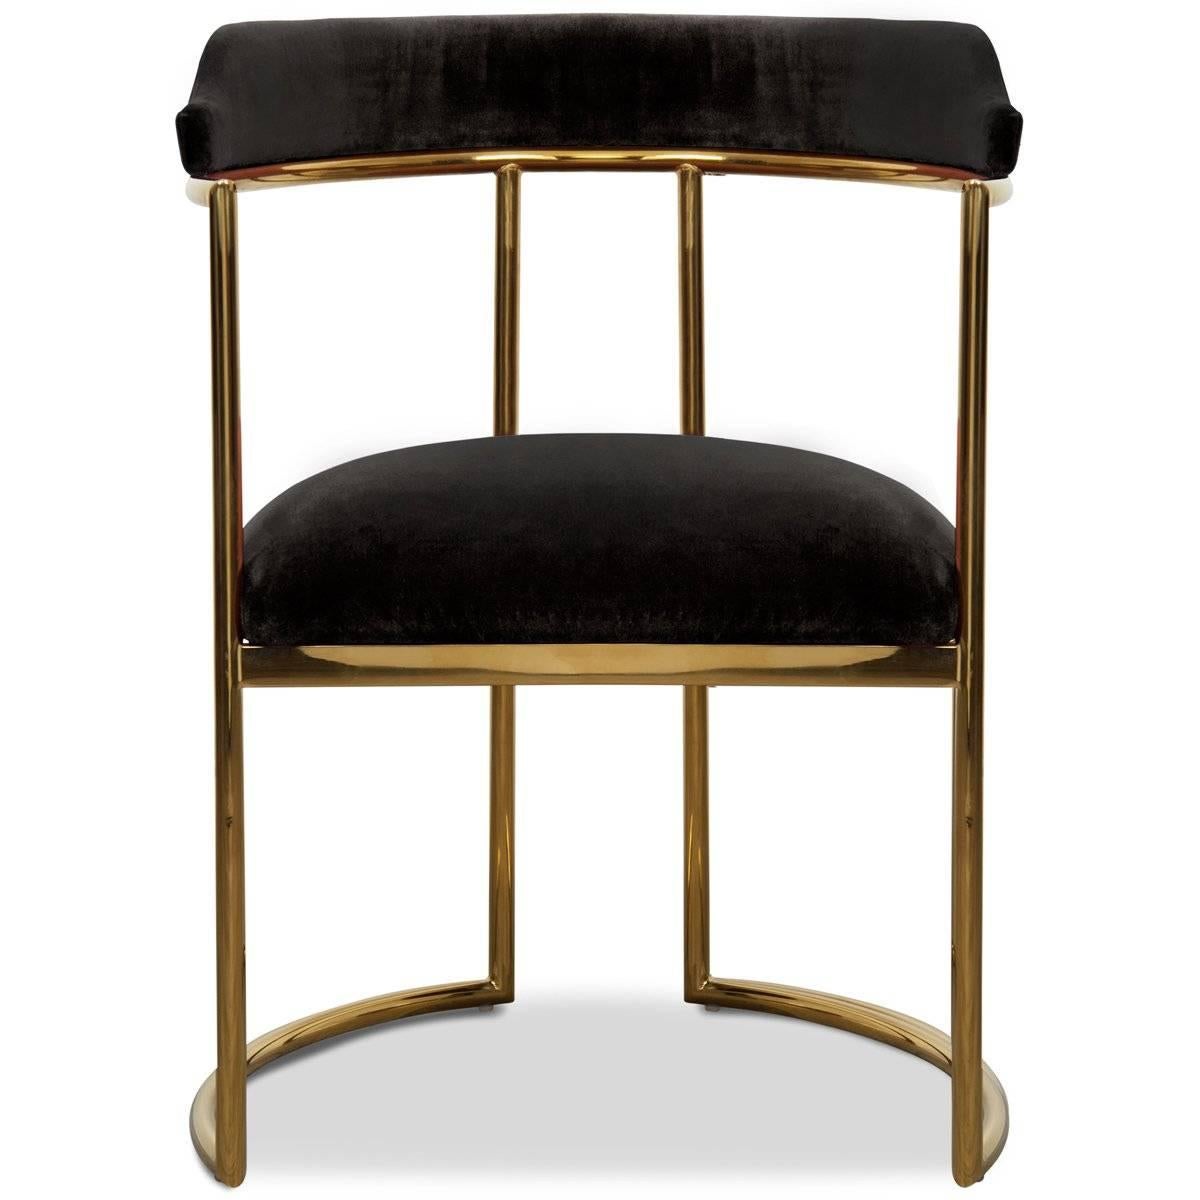 Meet the Acapulco two dining chair, the newest version of the popular Acapulco dining chair. As the perfect accent for your modern dining room, the Acapulco 2 is upholstered in your choice of colored velvet with beautifully curved brass legs and a